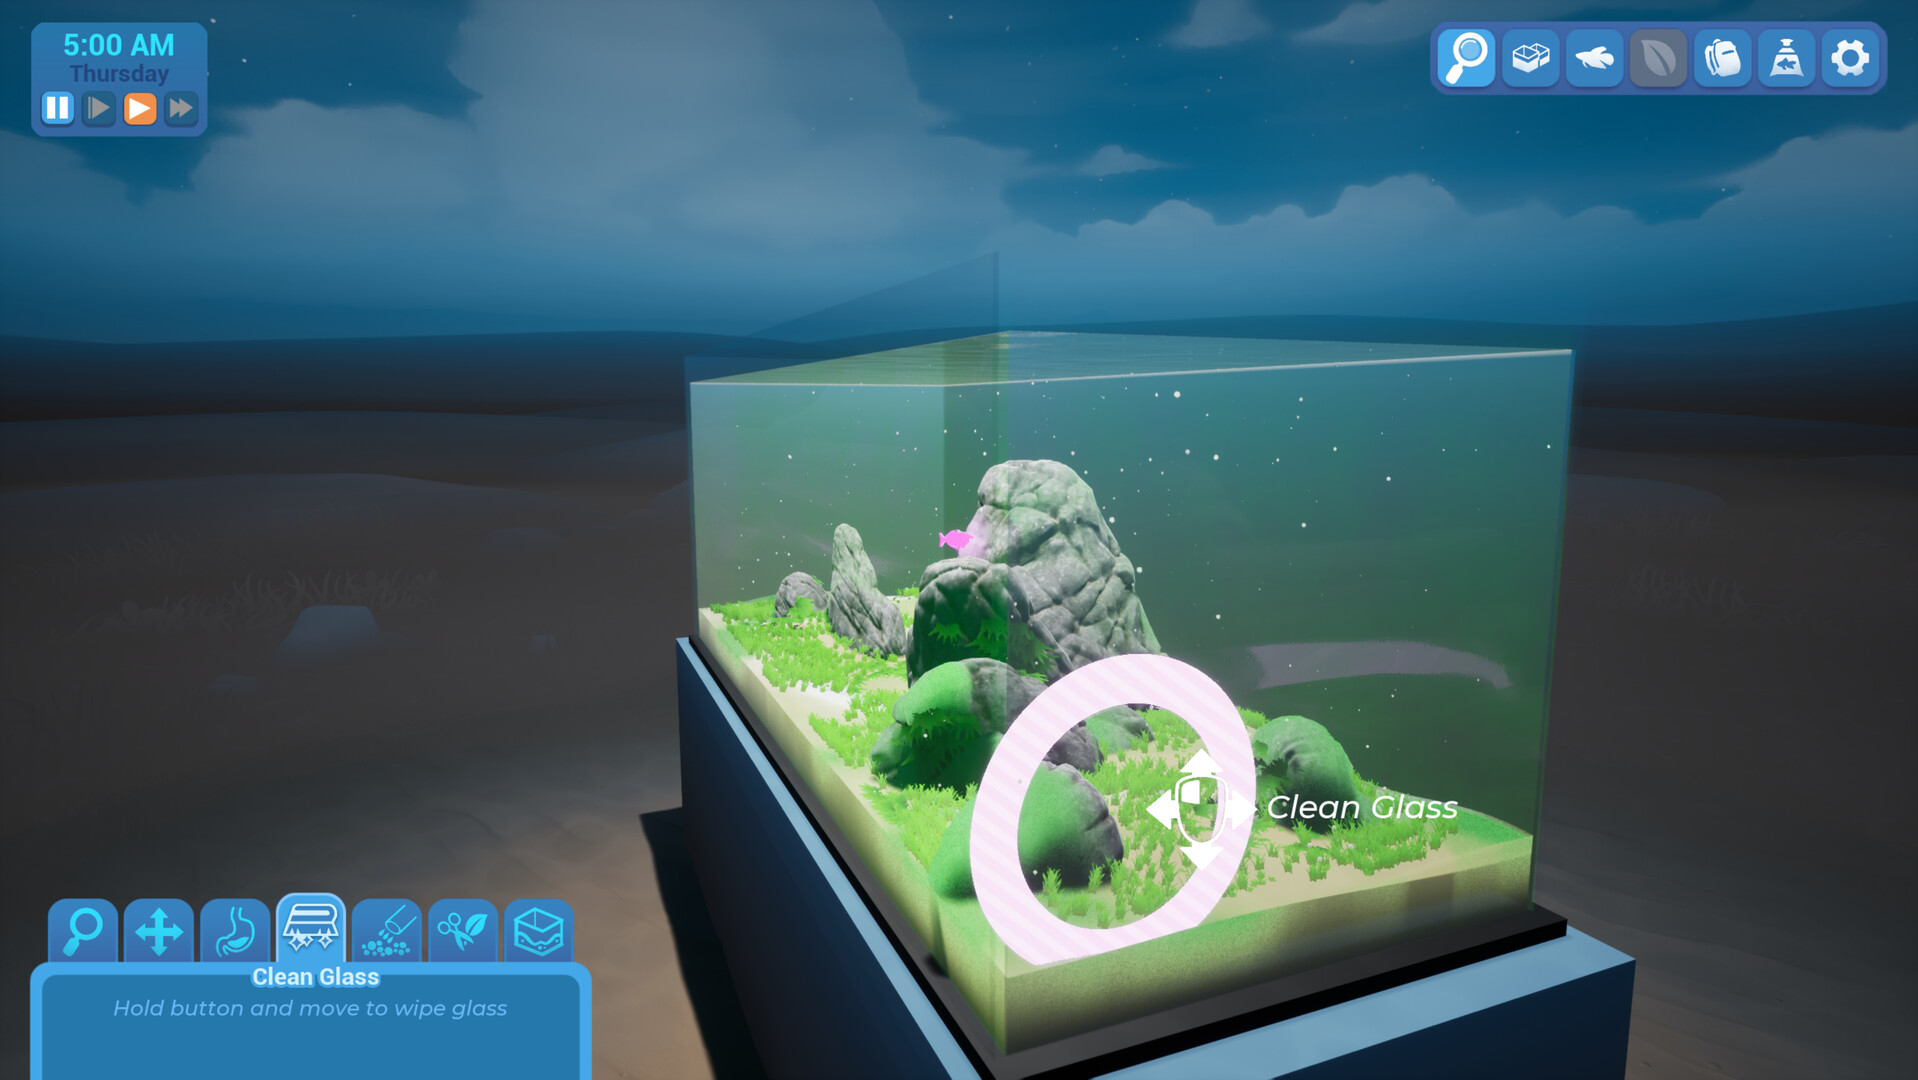 Fish Game on Steam